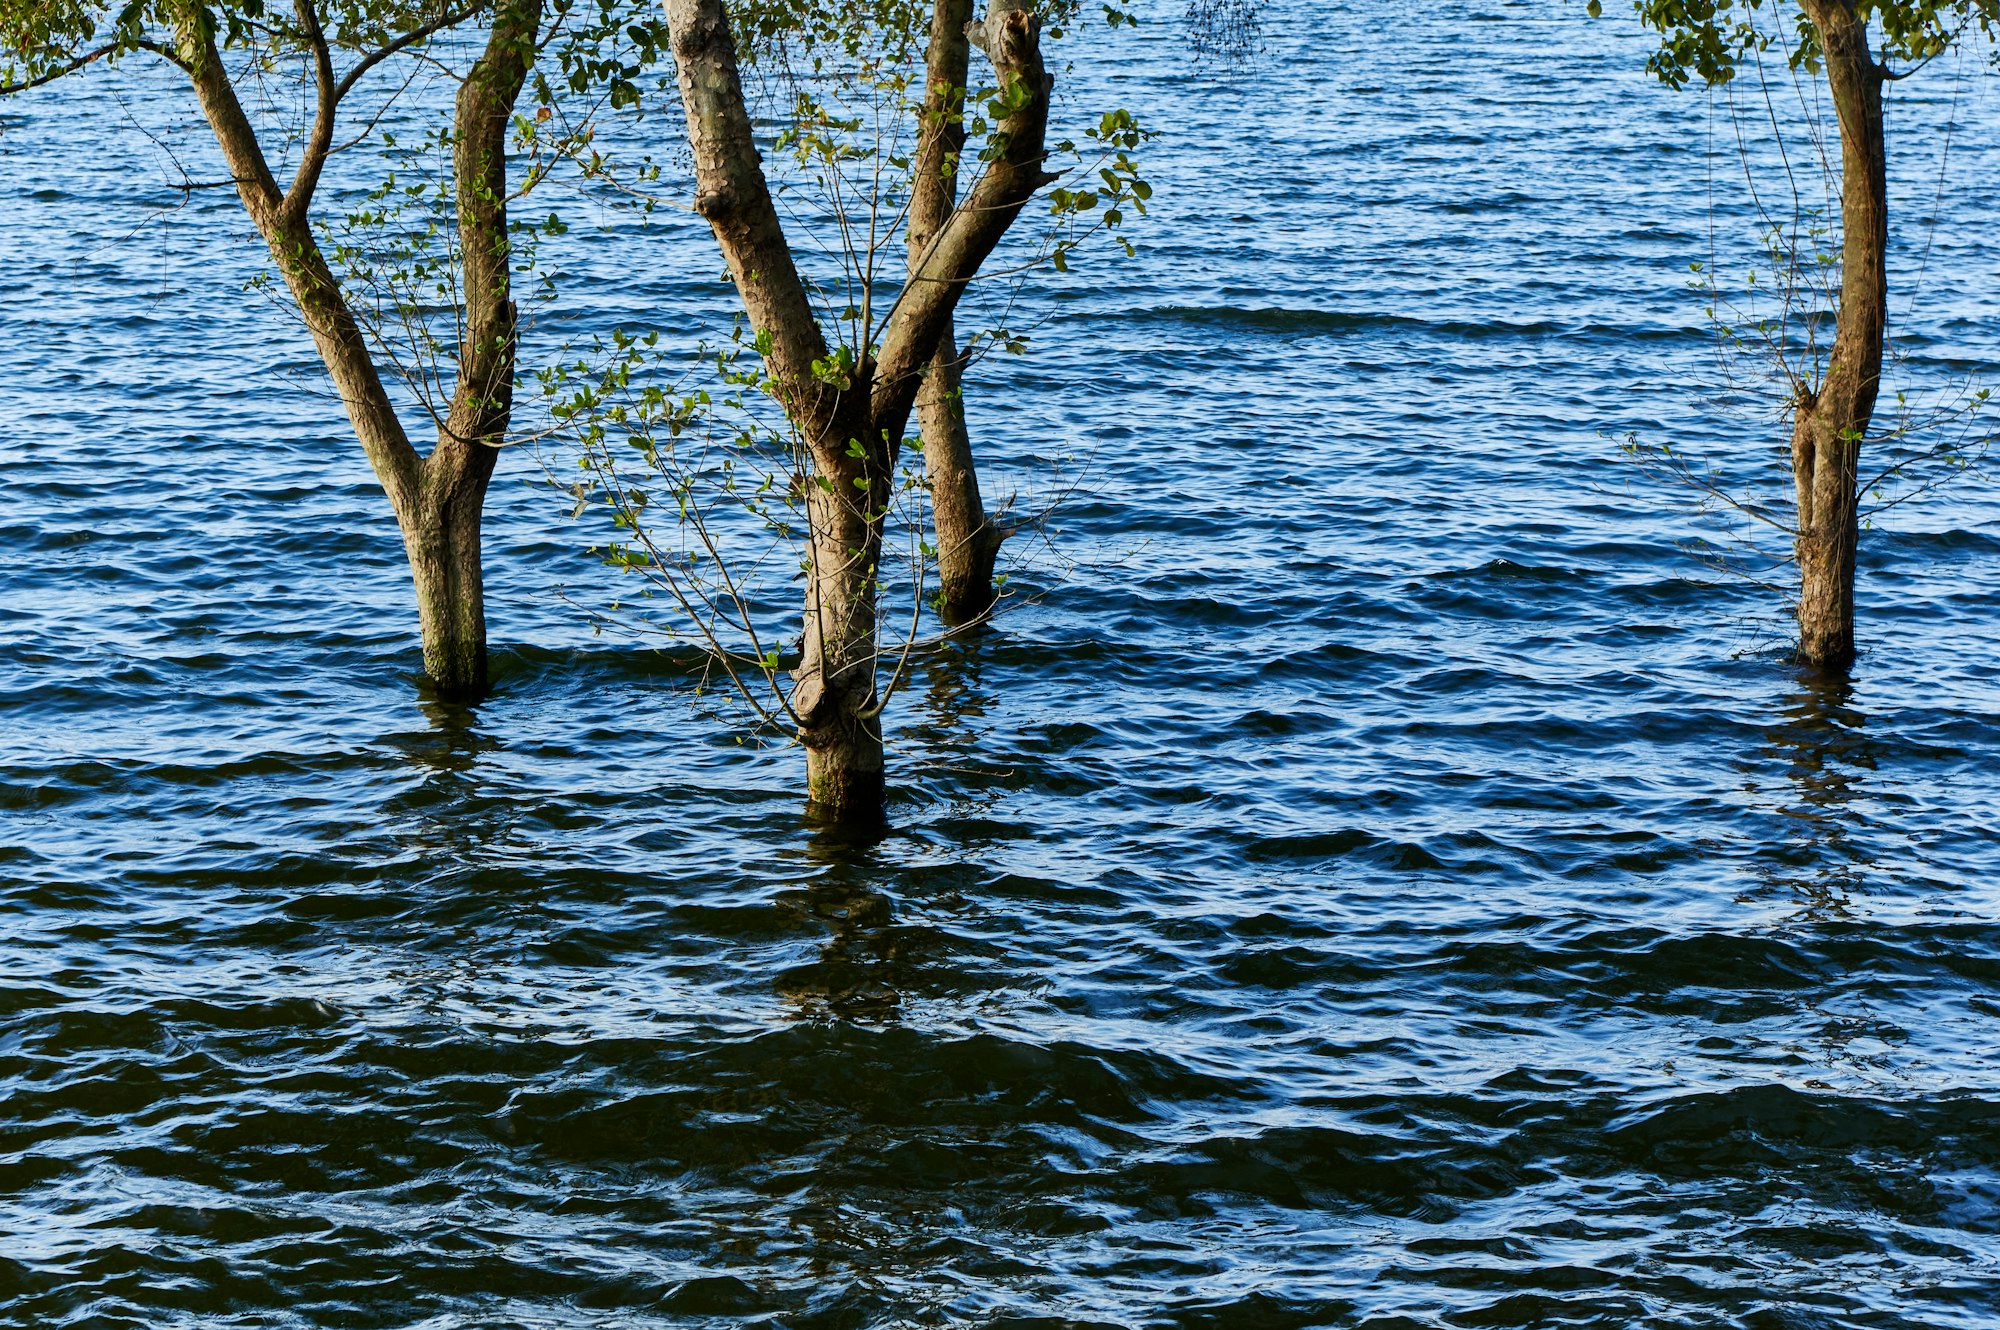 The trees on the water during flooding